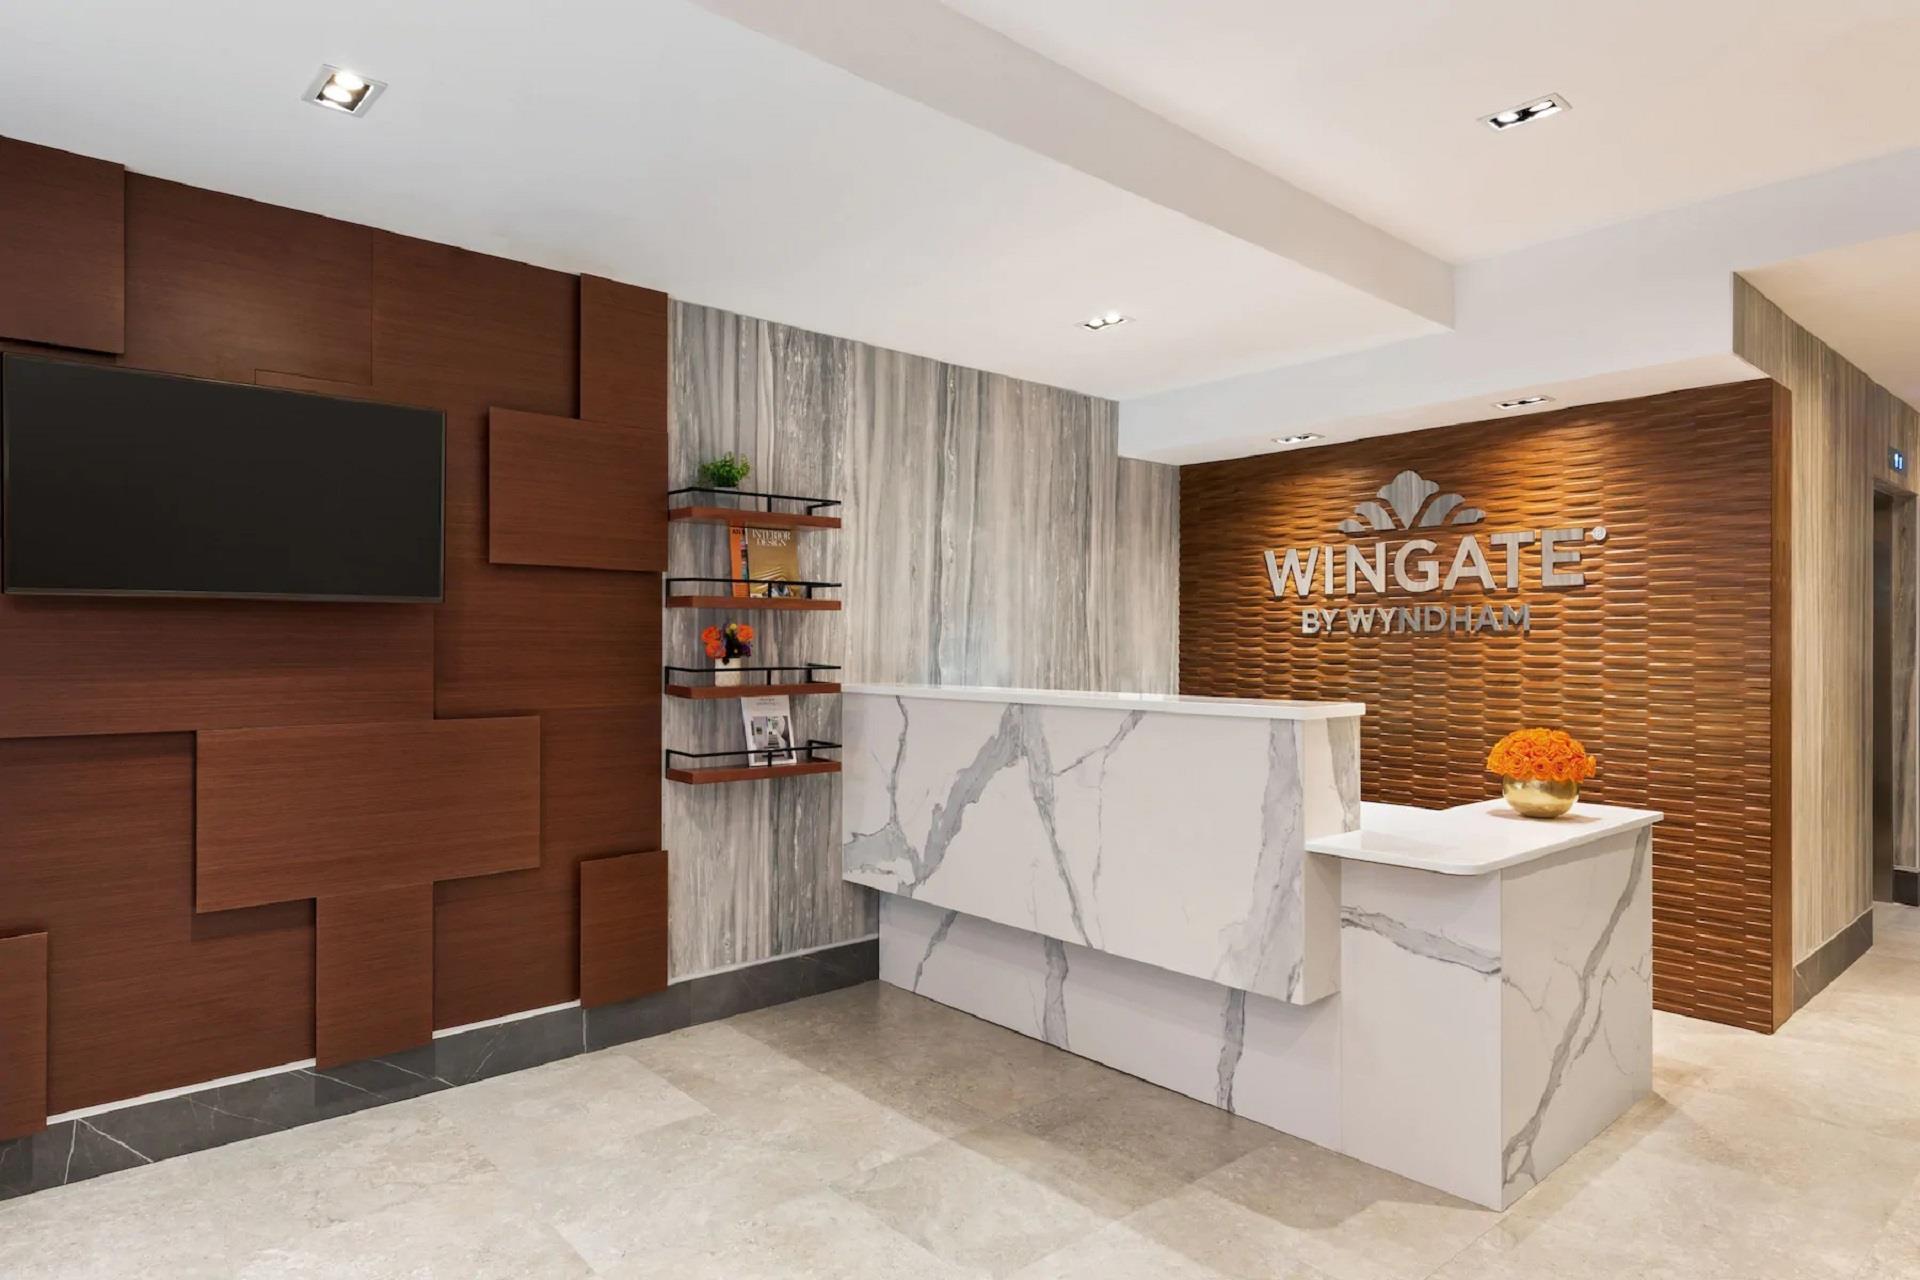 Wingate by Wyndham New York Midtown South/5th Ave in New York City, NY